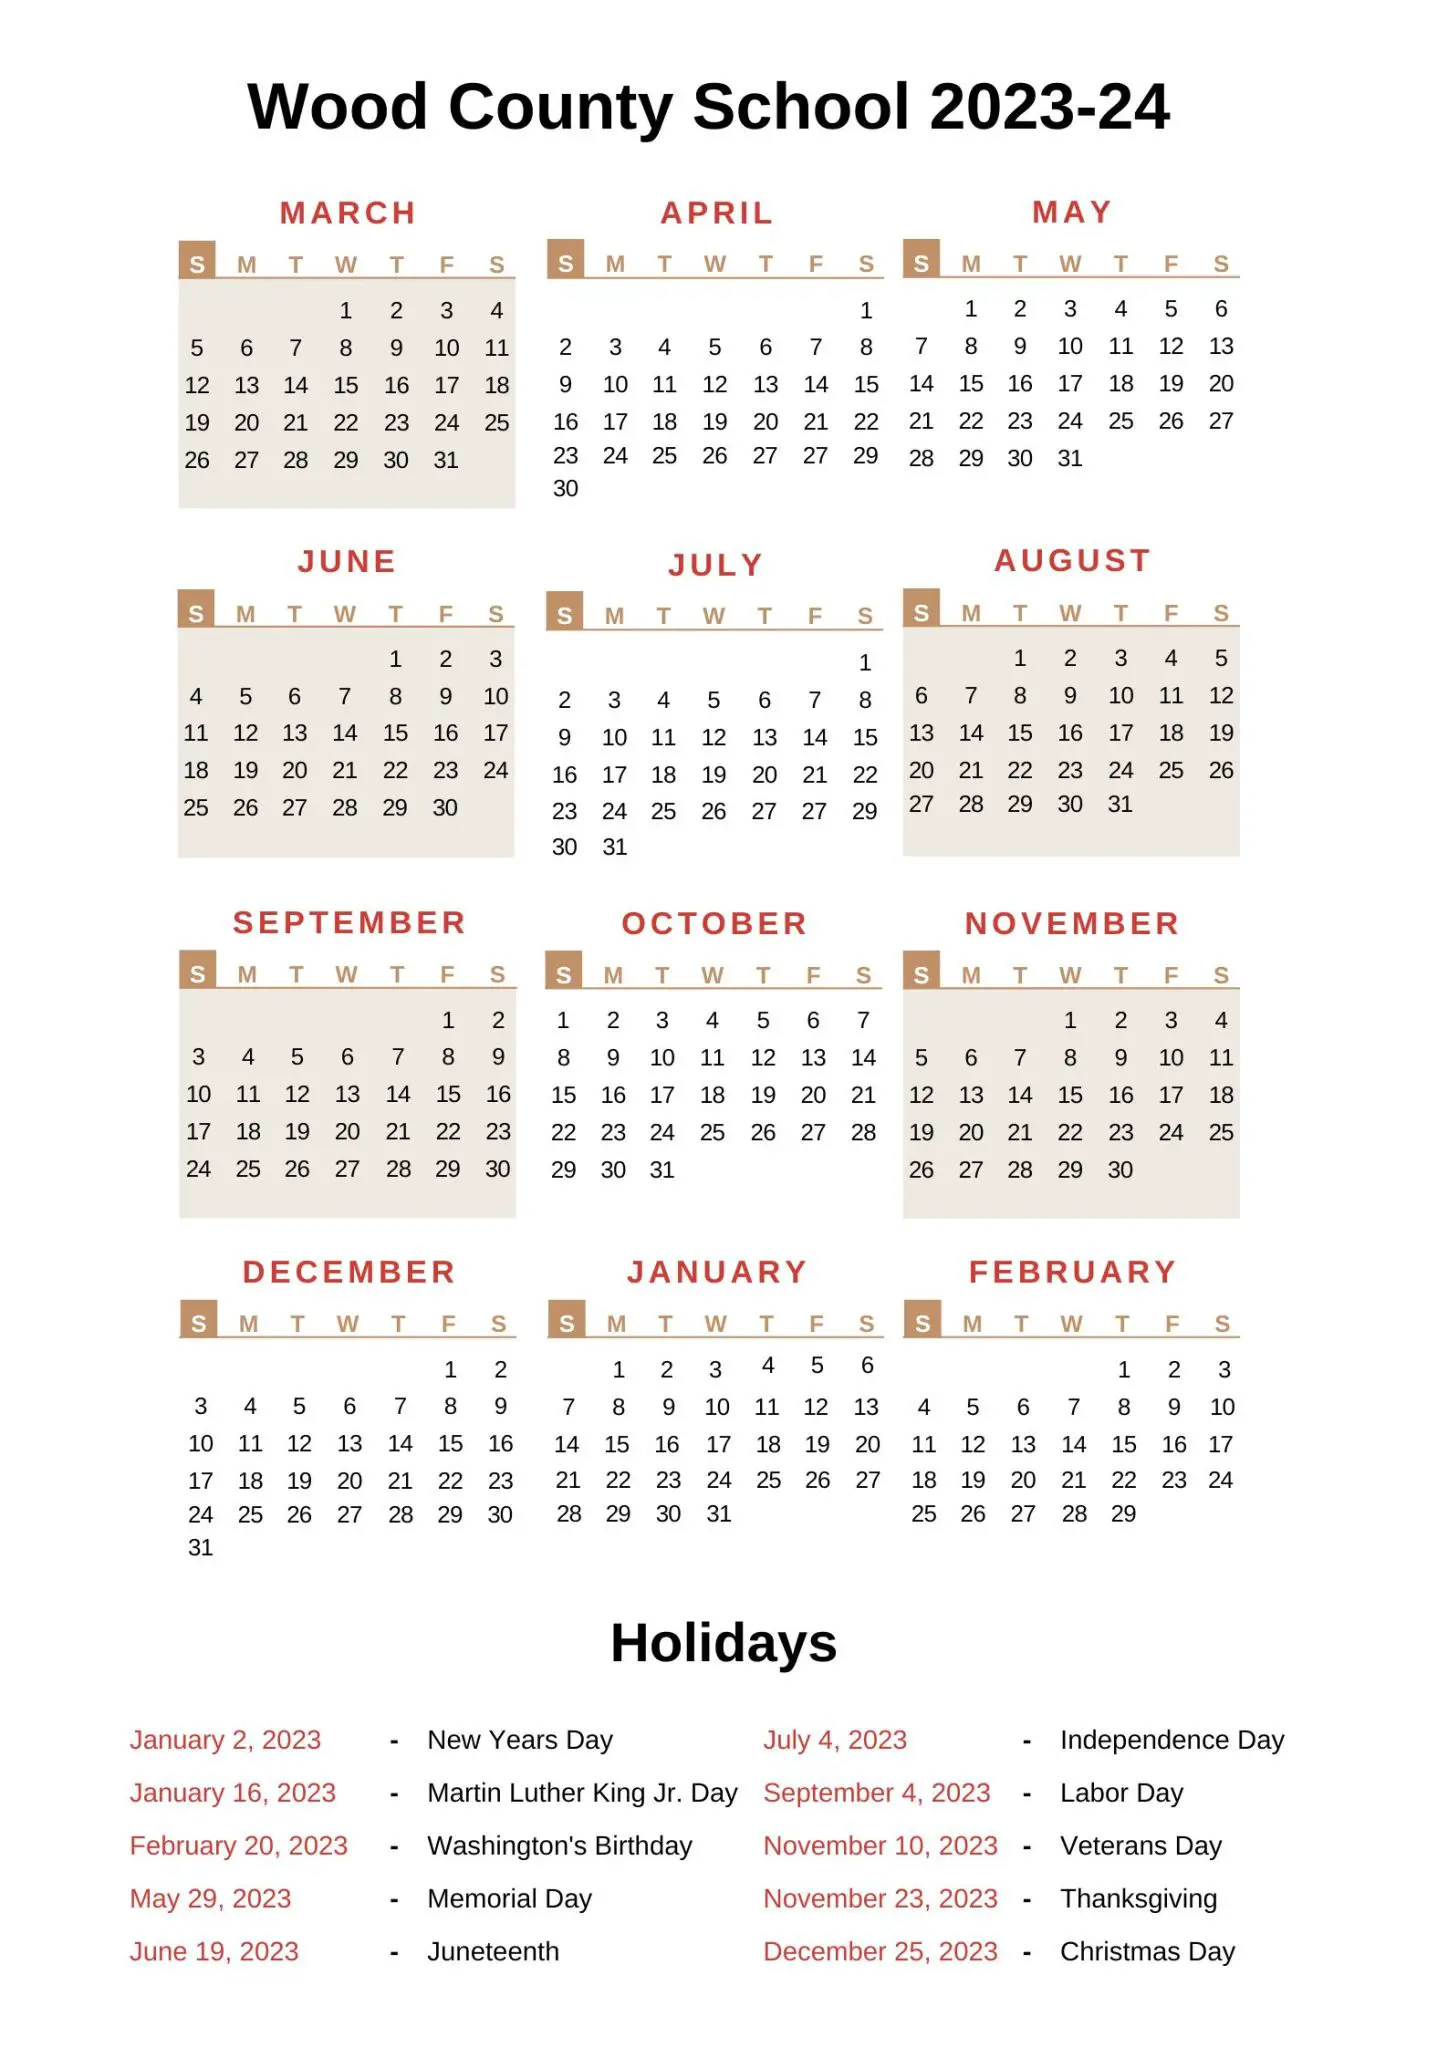 Wood County Schools Calendar 202324 With Holidays